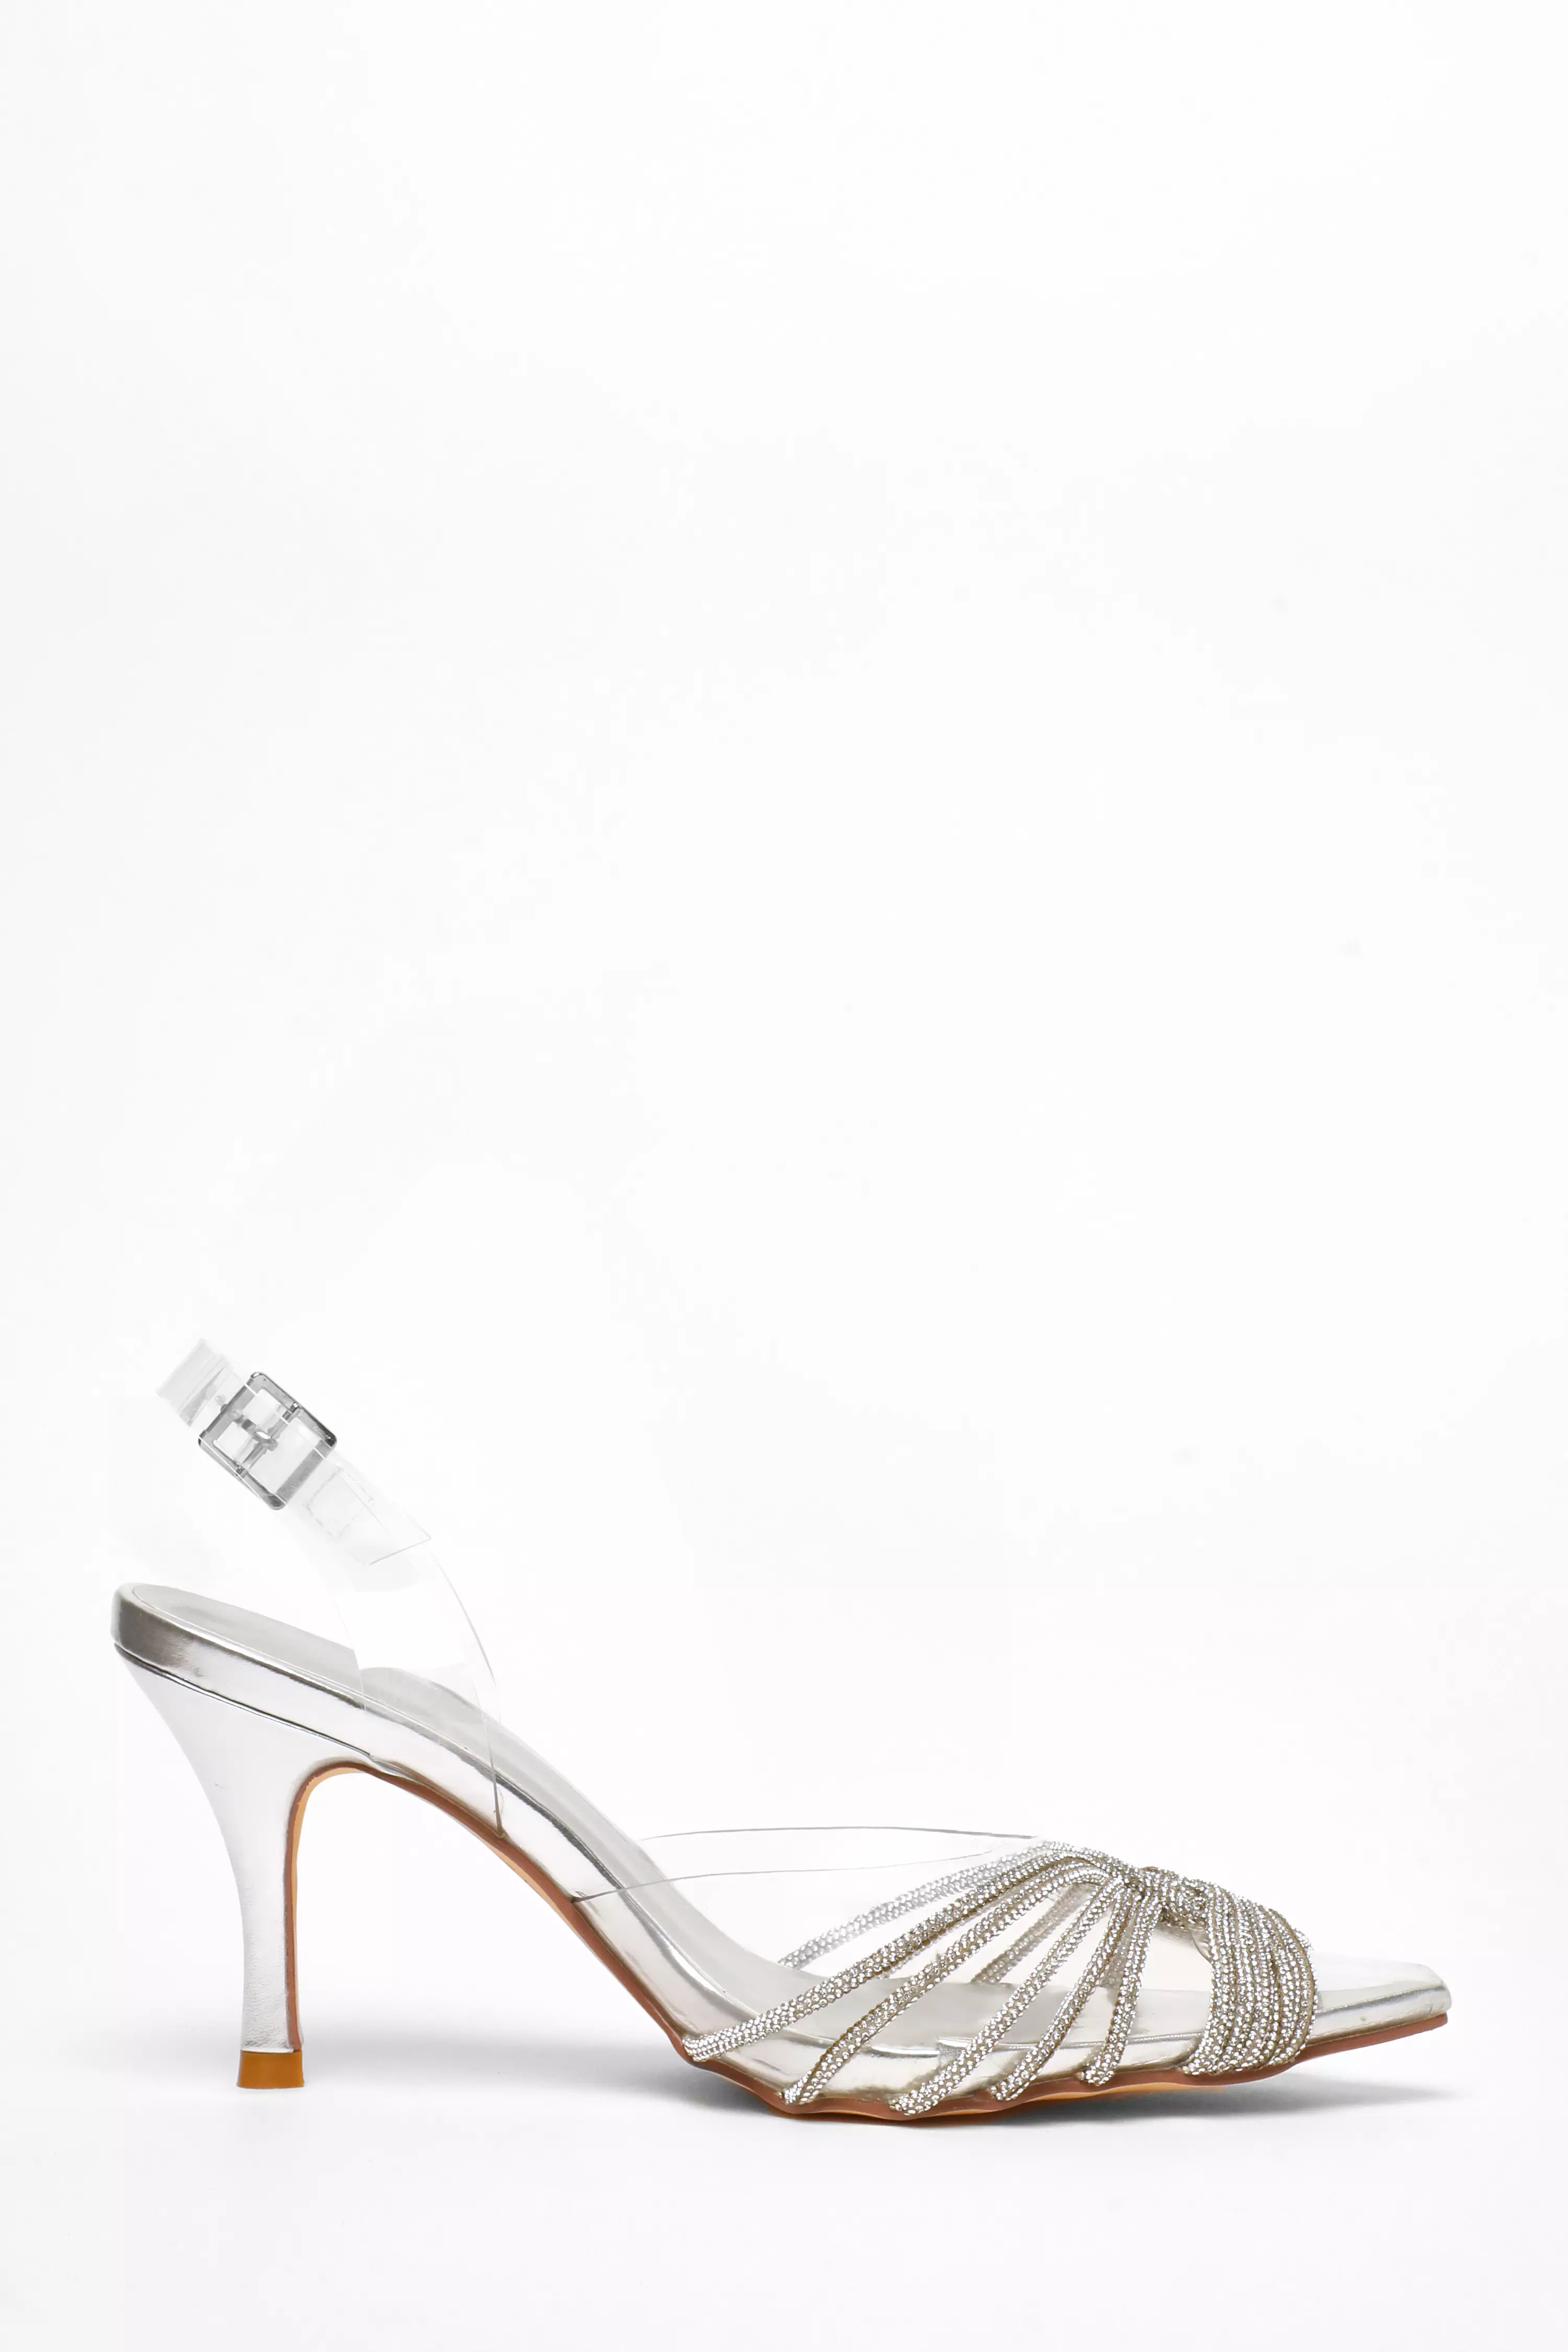 Silver Diamante Strappy Clear Sling Back Low Heels 